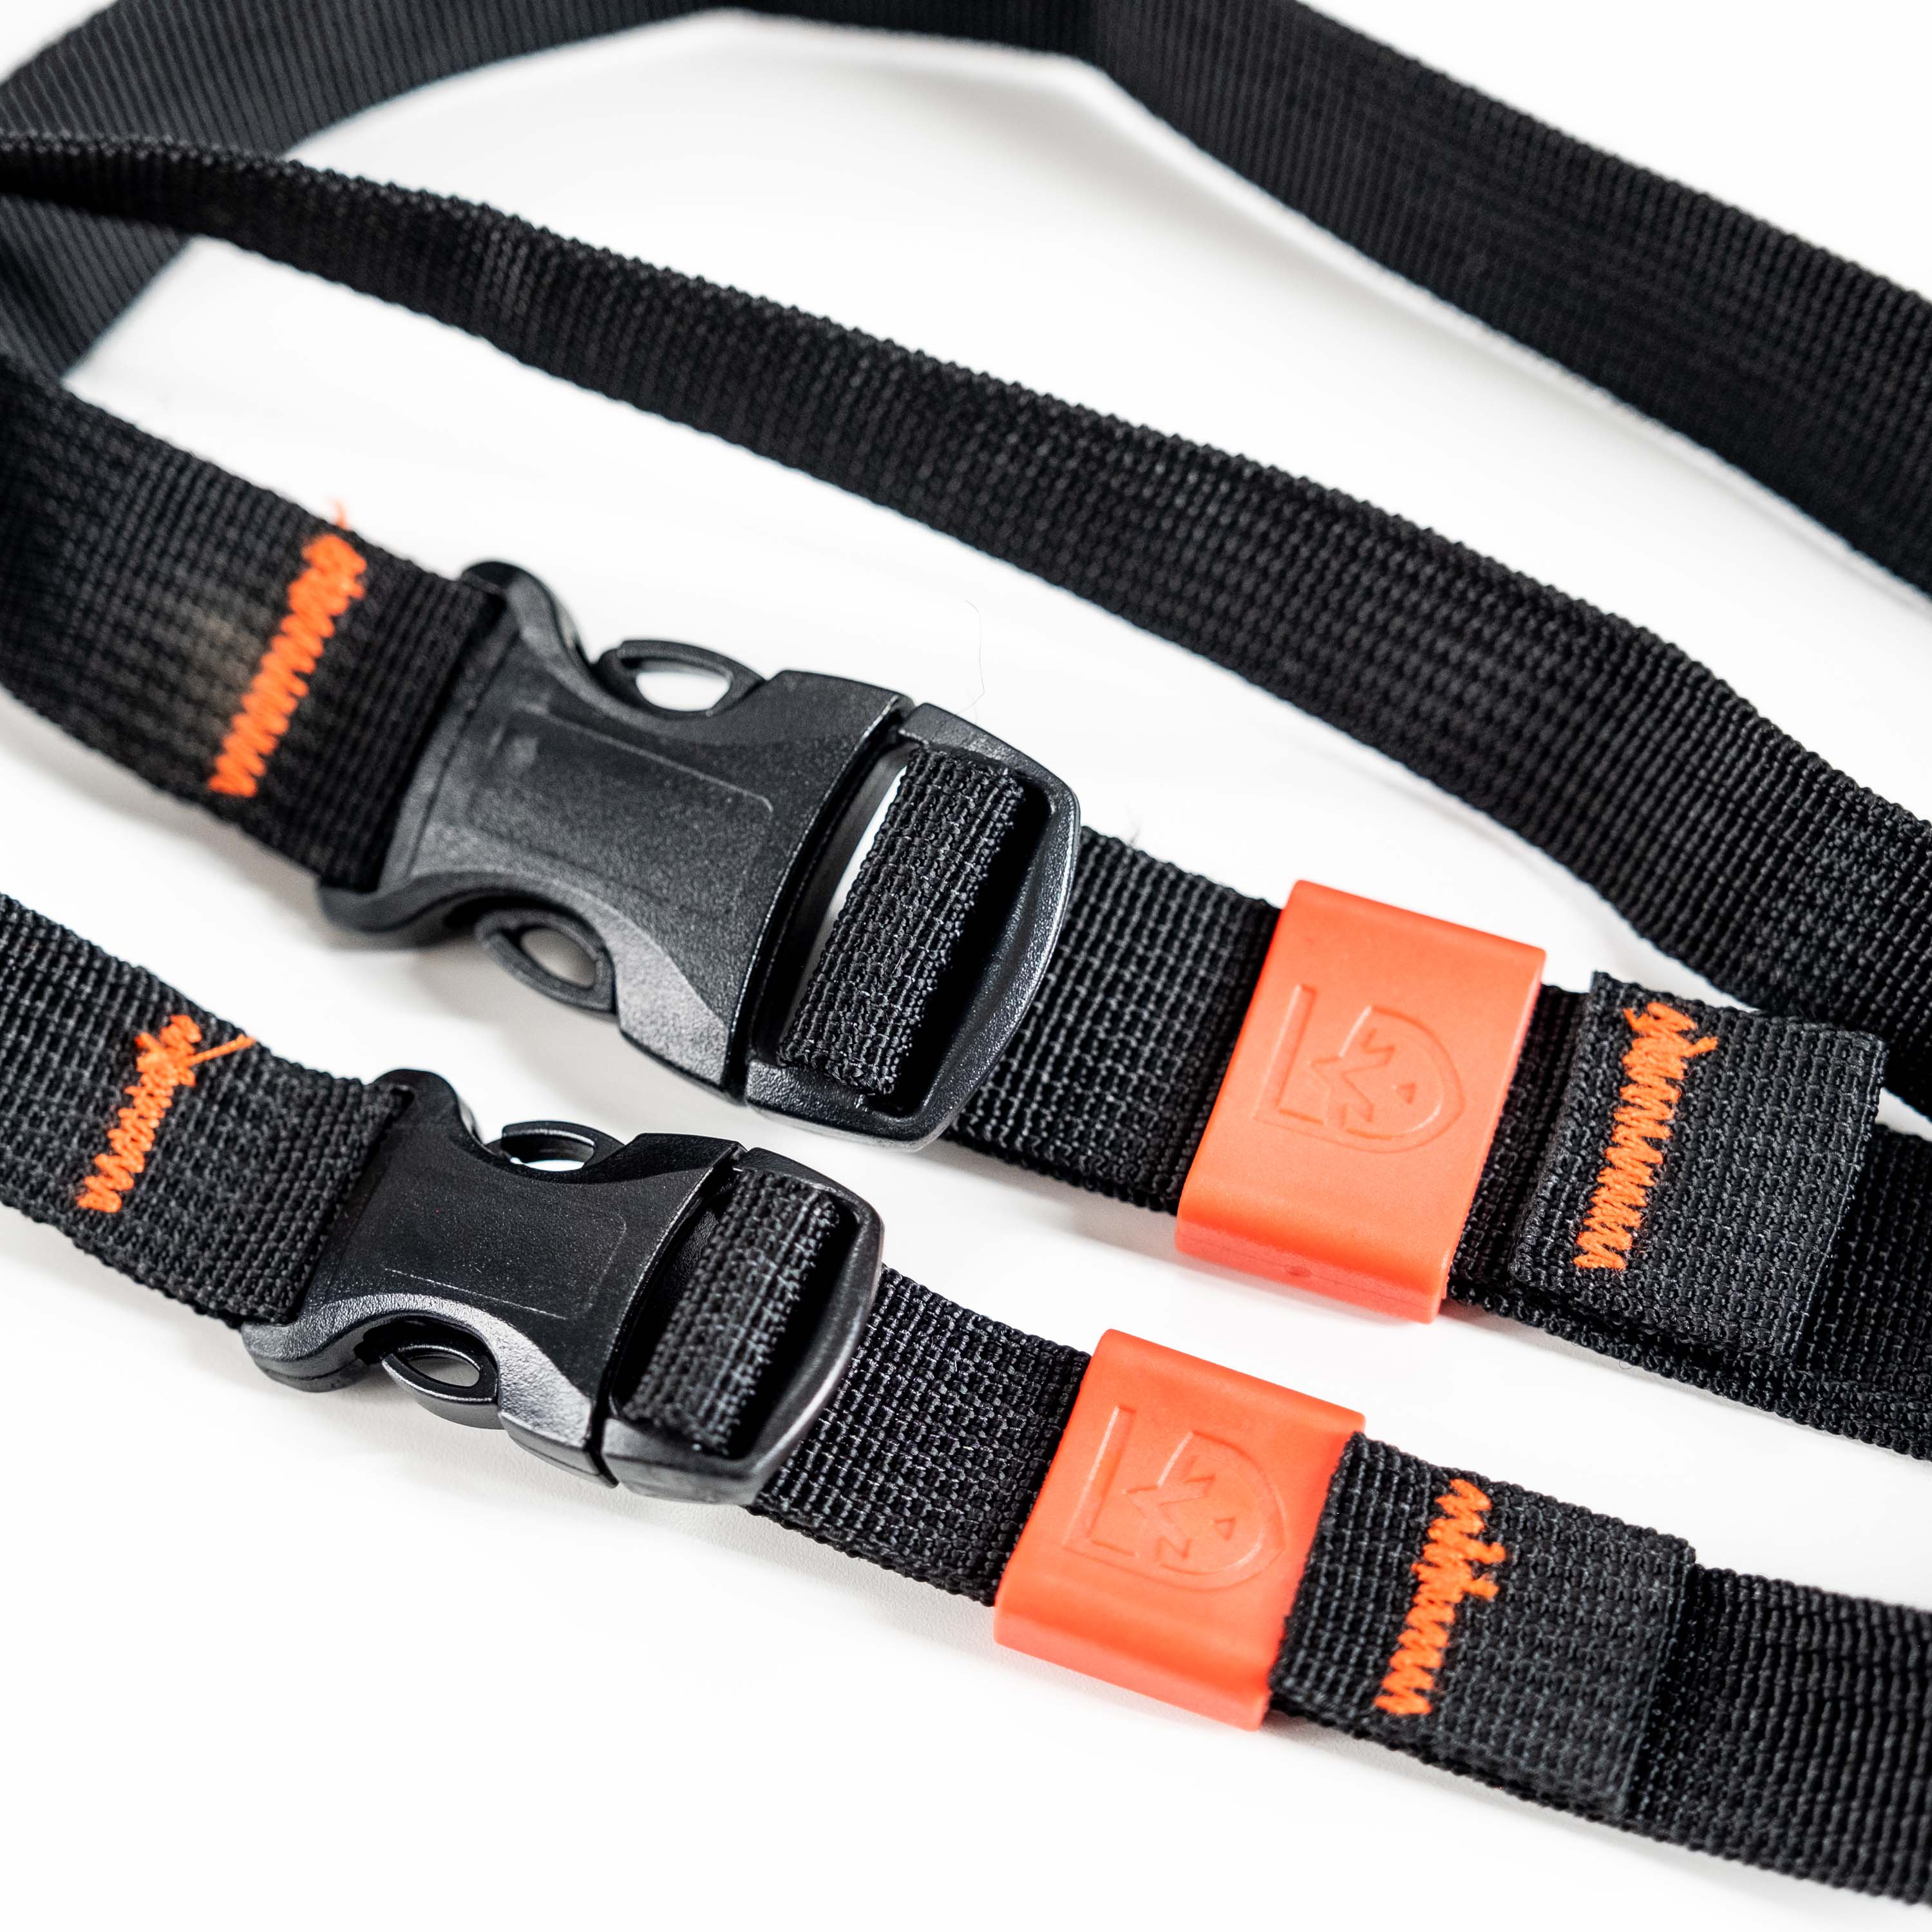 Utility Strap Quick-Release Buckle Adjustable Heavy Duty Tie Down Straps,72Lx1.25W,Black,4 Pack